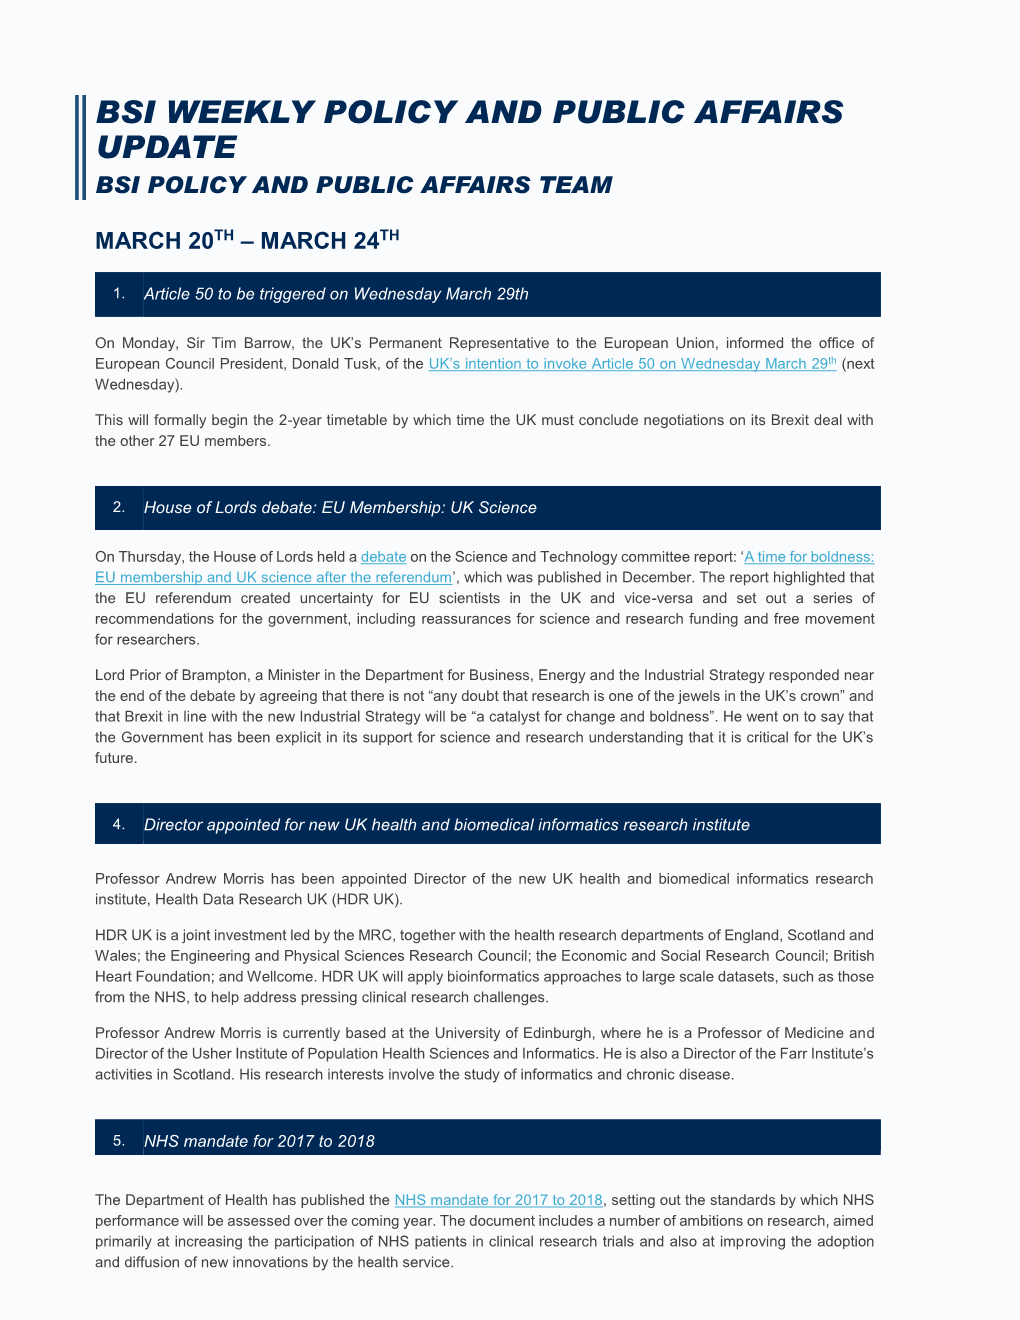 Bsi Weekly Policy and Public Affairs Update Bsi Policy and Public Affairs Team